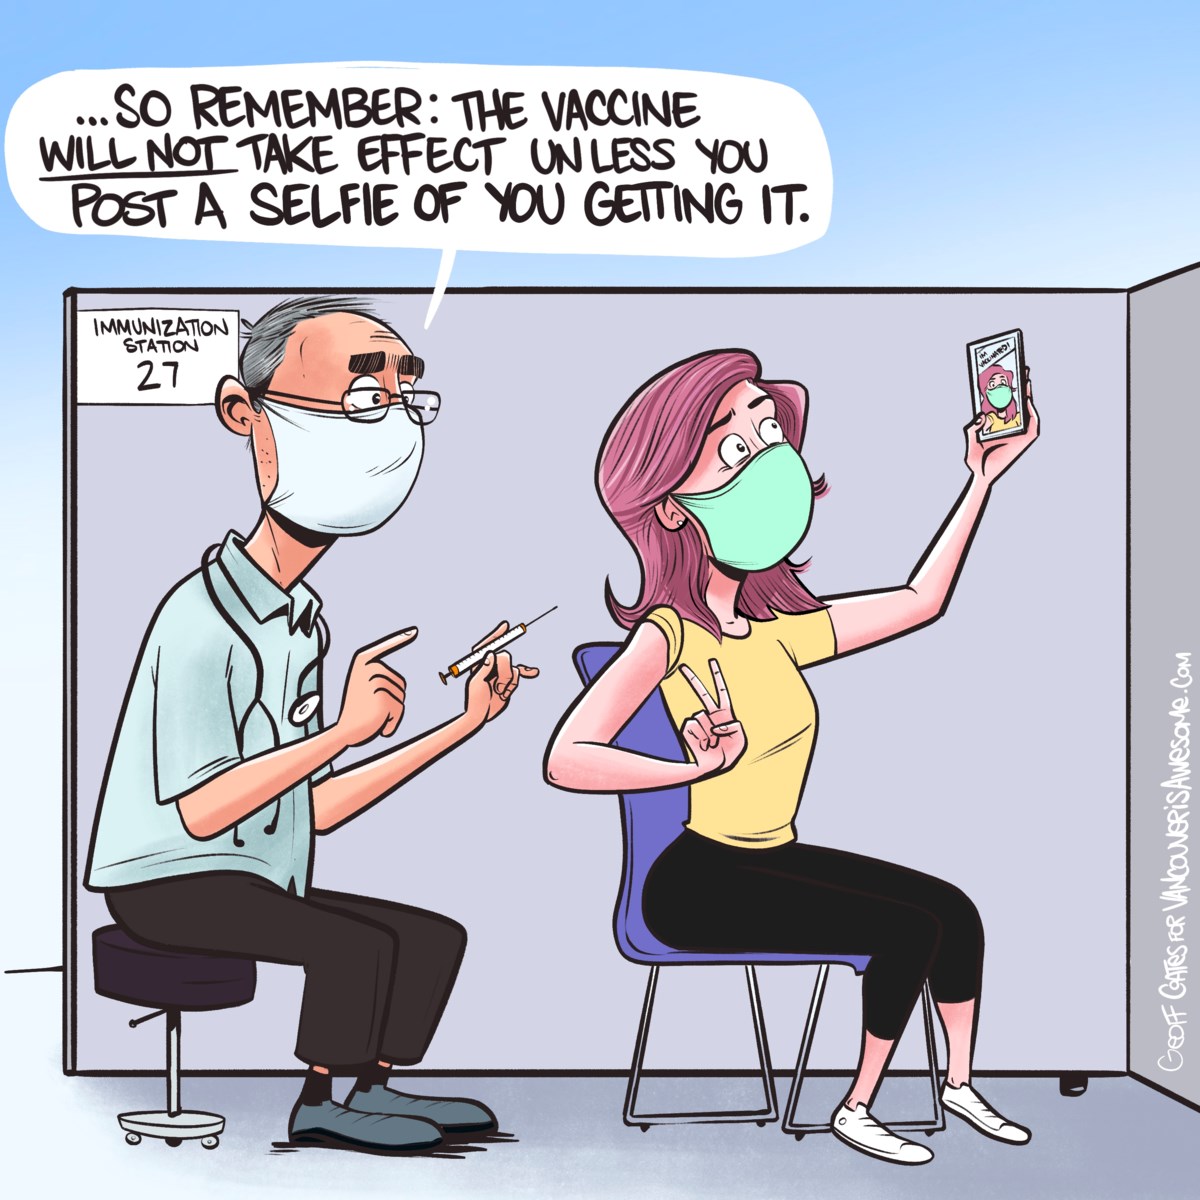 Comic pokes fun at vaccine selfies - Vancouver Is Awesome